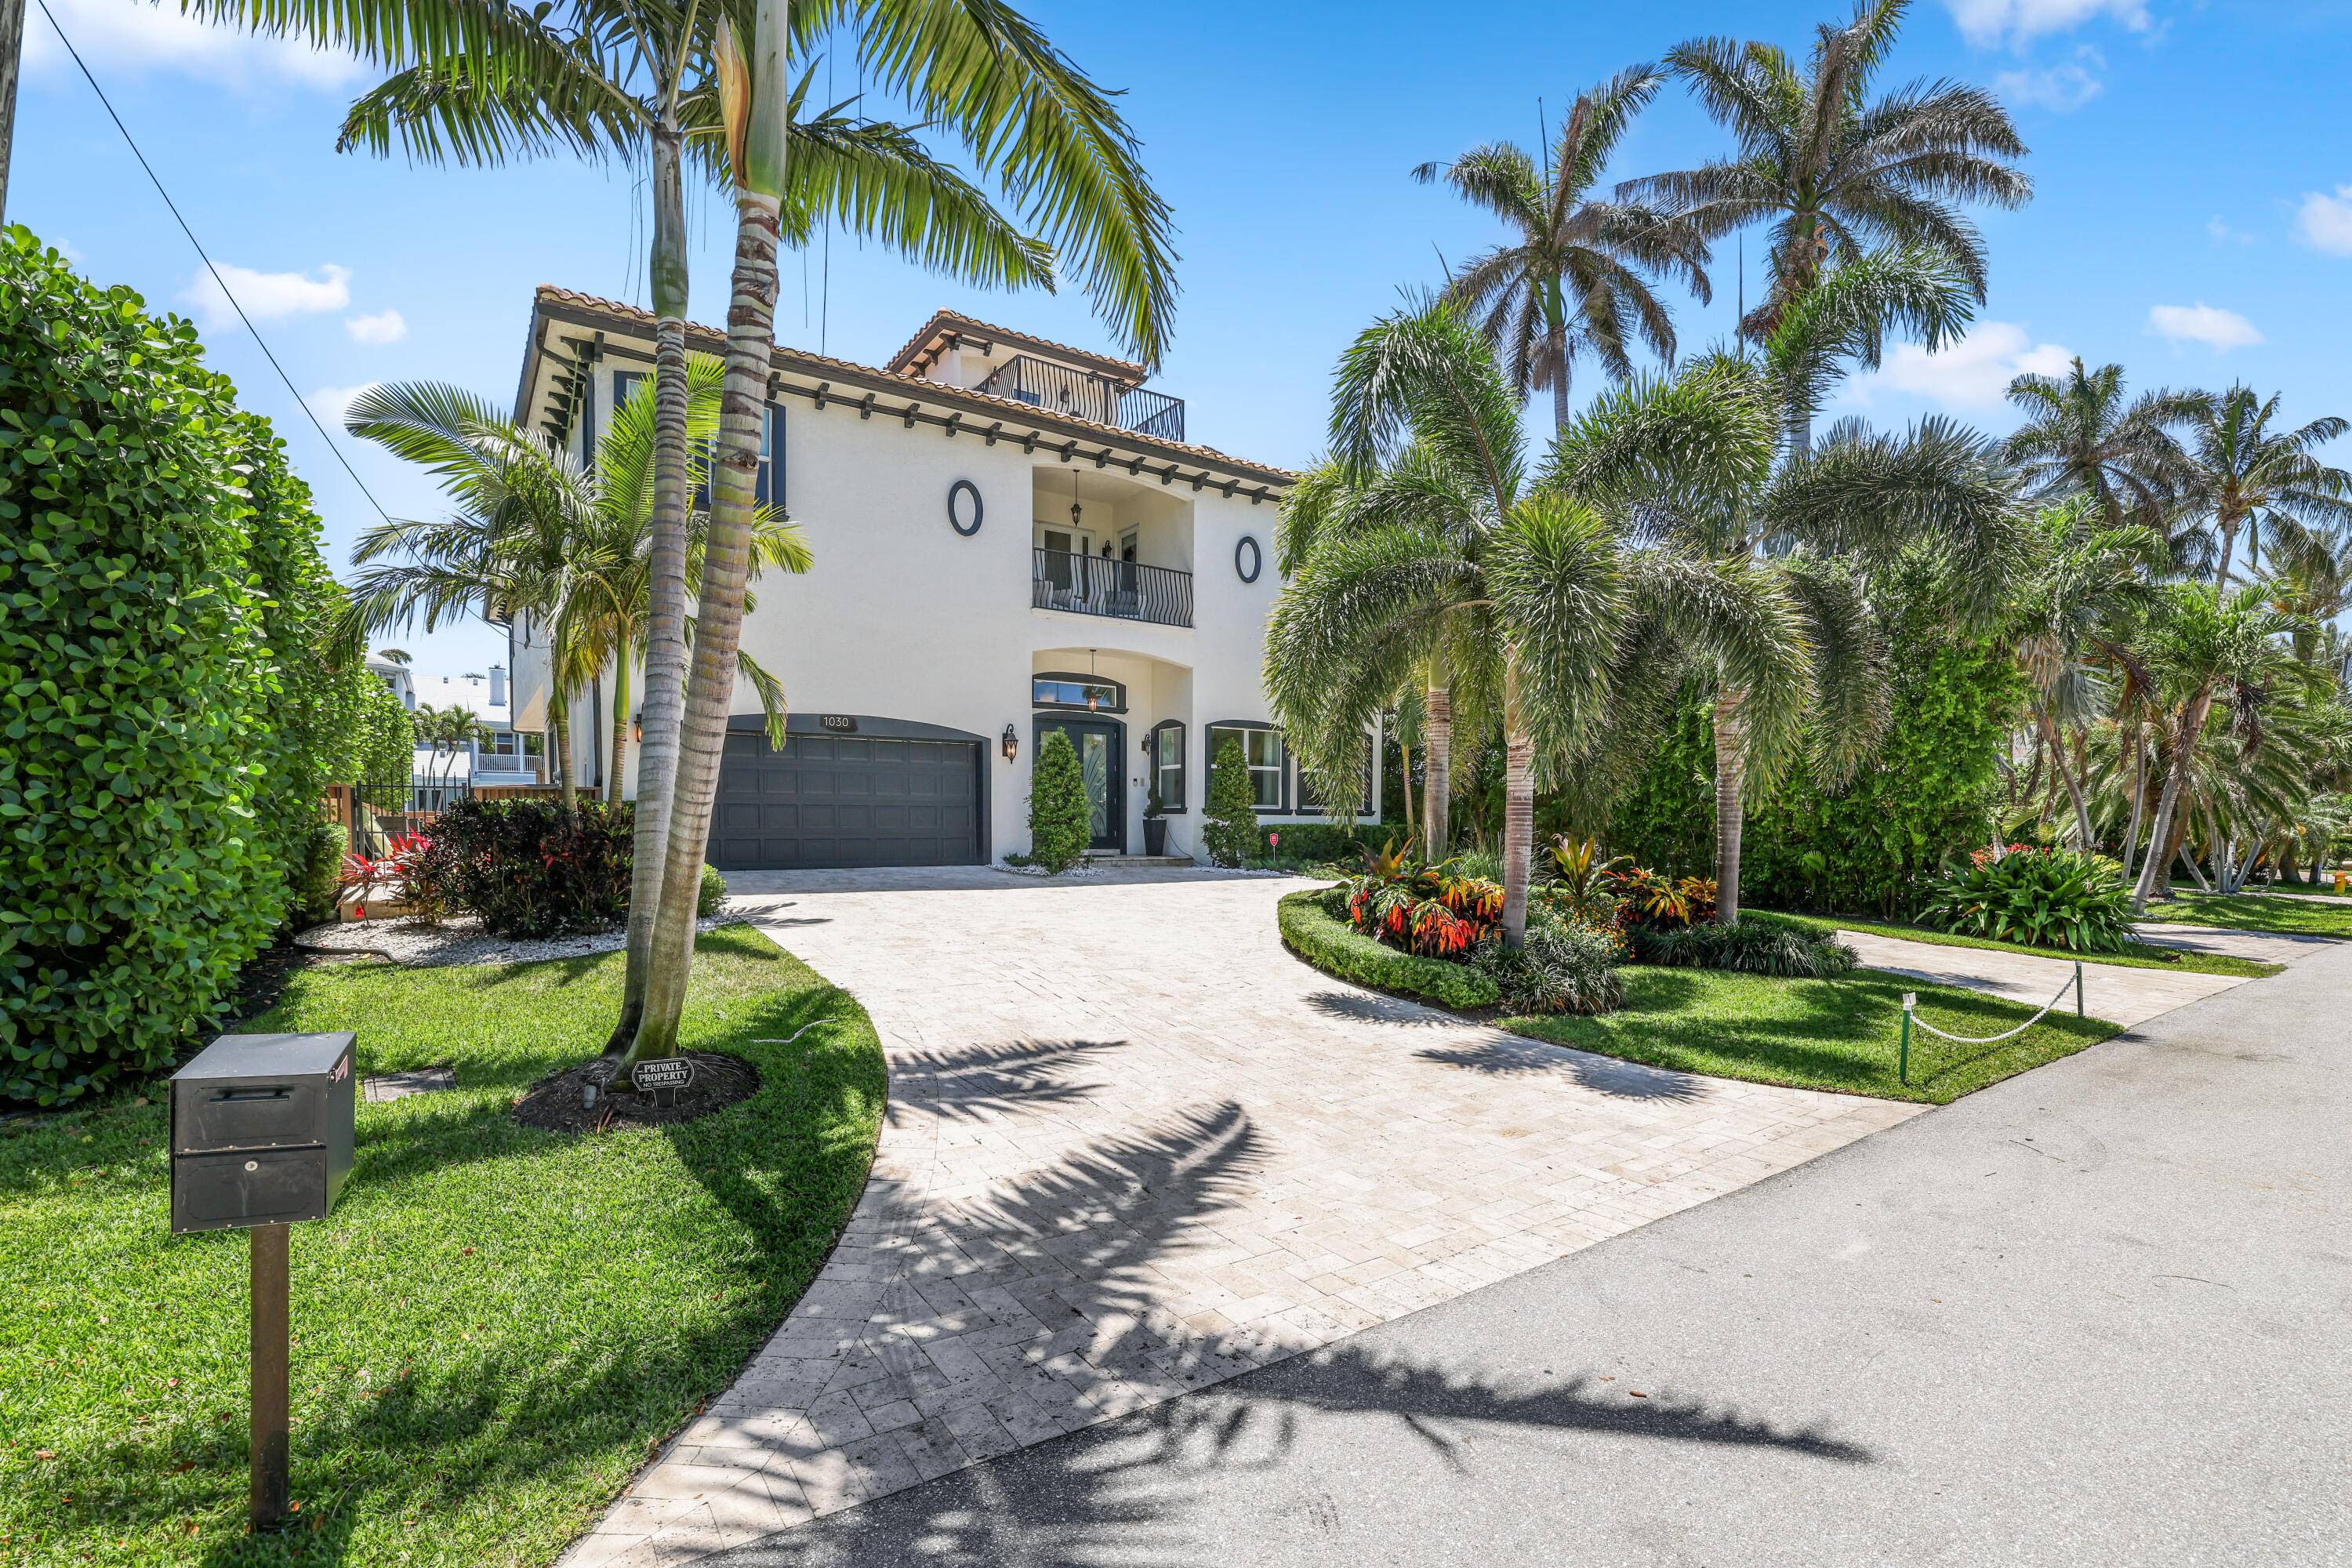 Experience the pinnacle of South Florida living in this stunning waterfront residence in East Delray, perfectly located between the vibrant downtown scene on Atlantic Ave and the abundant shopping and ...